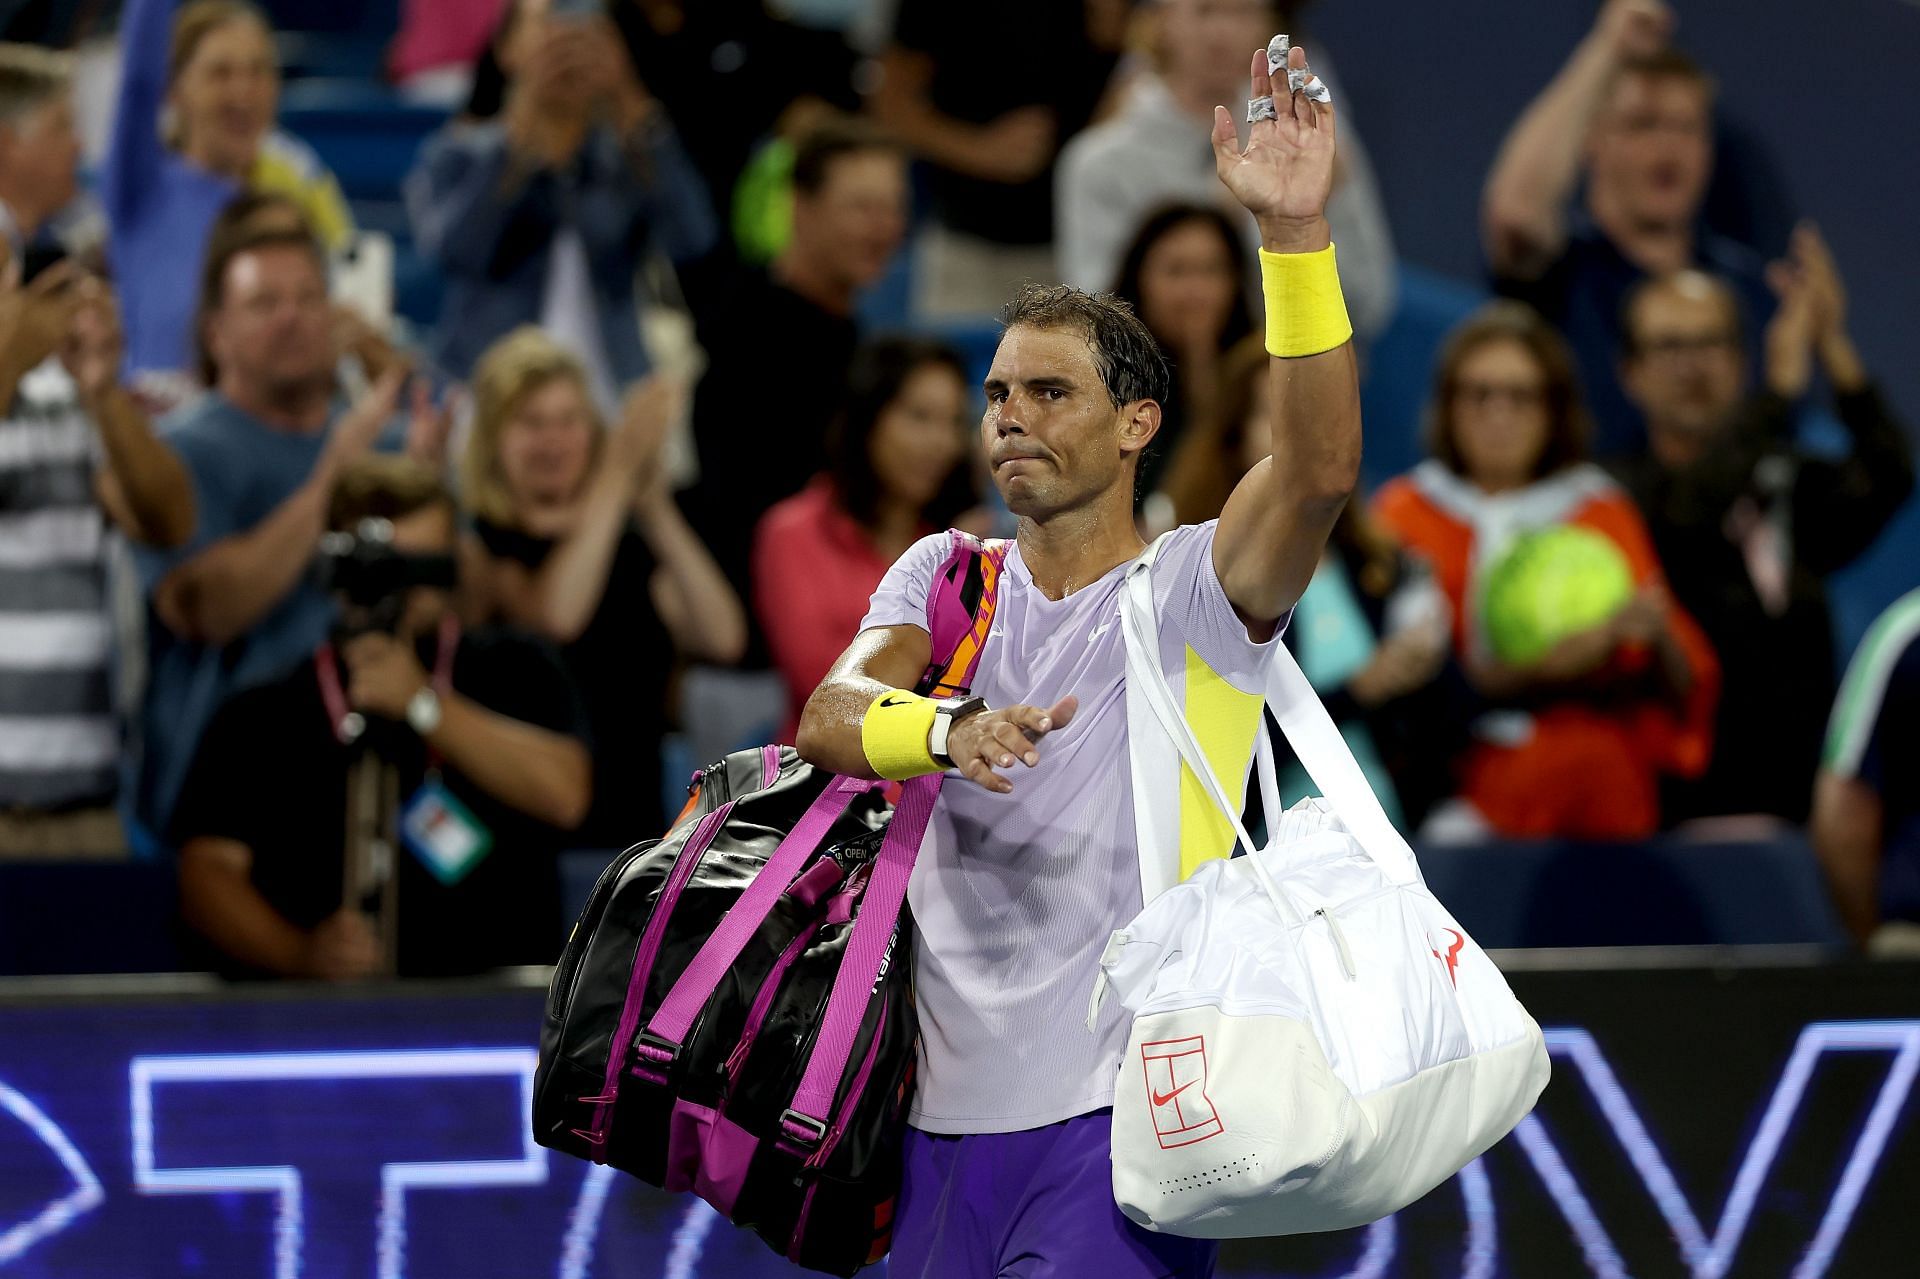 Rafael Nadal acknowledges the crowd as he leaves the court after losing to Borna Coric in Cincinnati